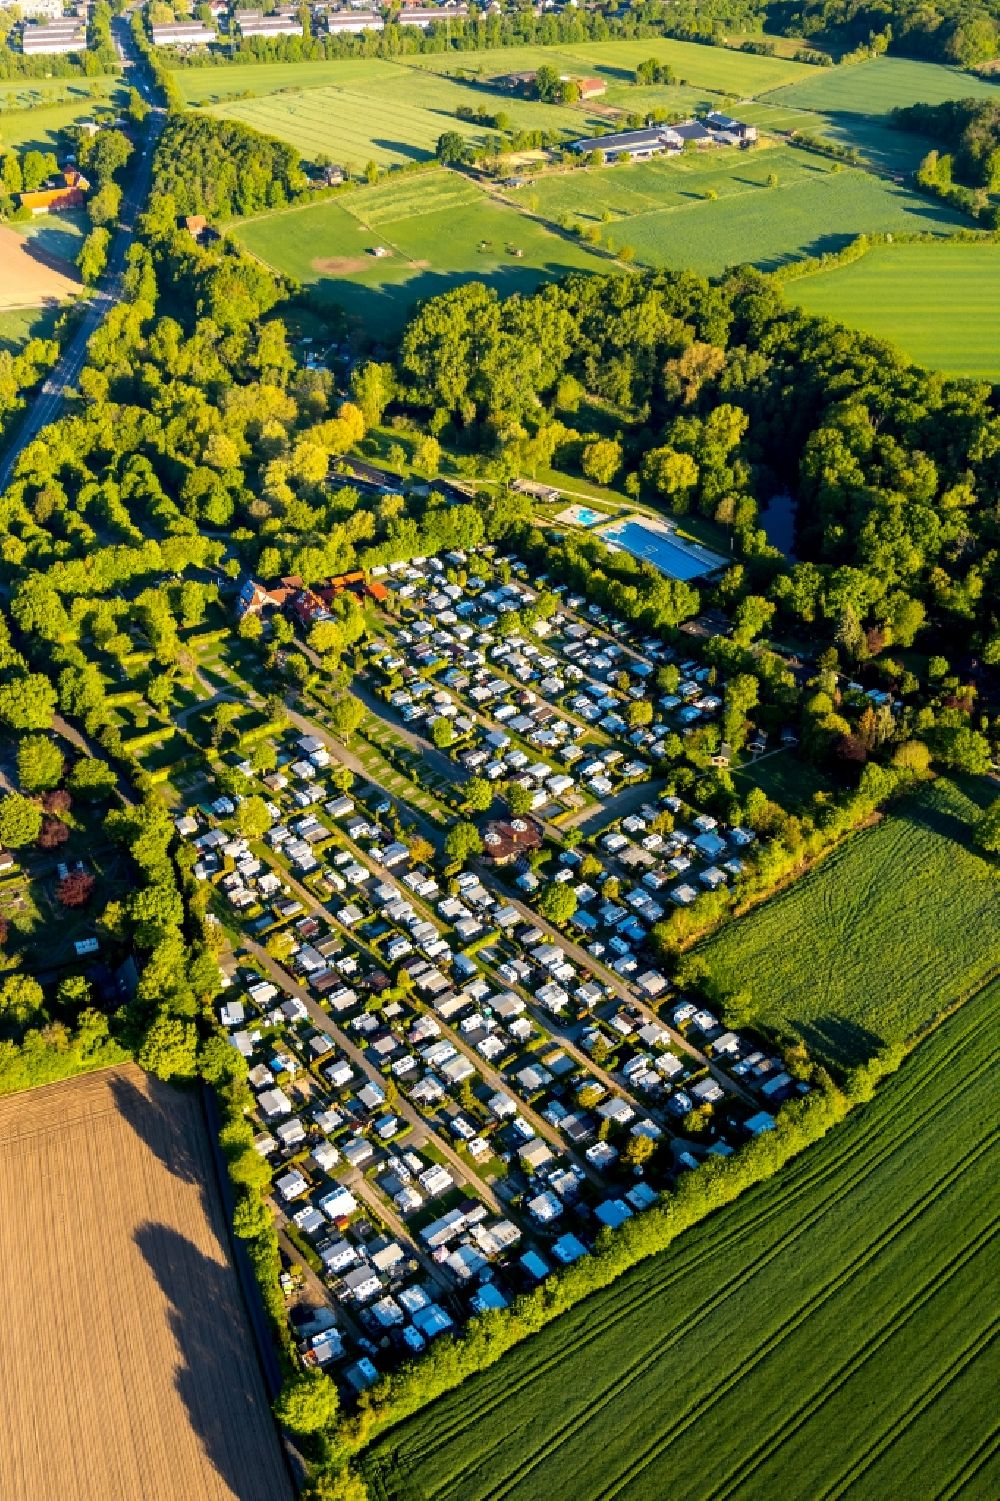 Münster from the bird's eye view: Camping with caravans and tents of Campingplatz Muenster overlooking the Freibad Stapelskotten am Laerer Werseufer - Auf der Laer in Muenster in the state North Rhine-Westphalia, Germany